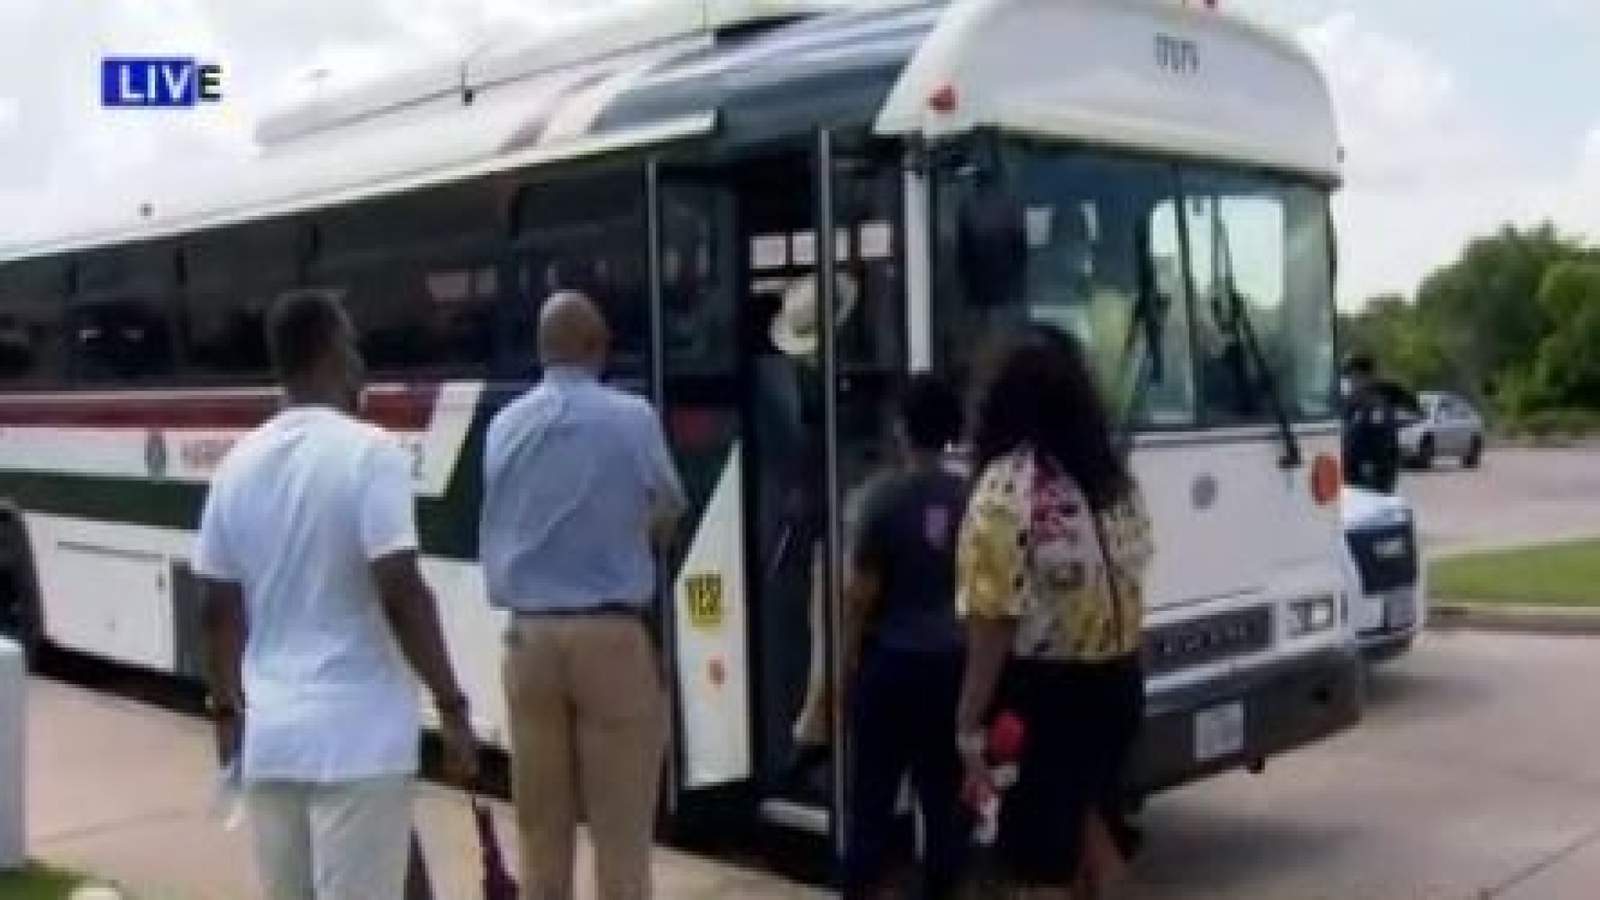 Crowds board shuttles to attend George Floyds final public memorial